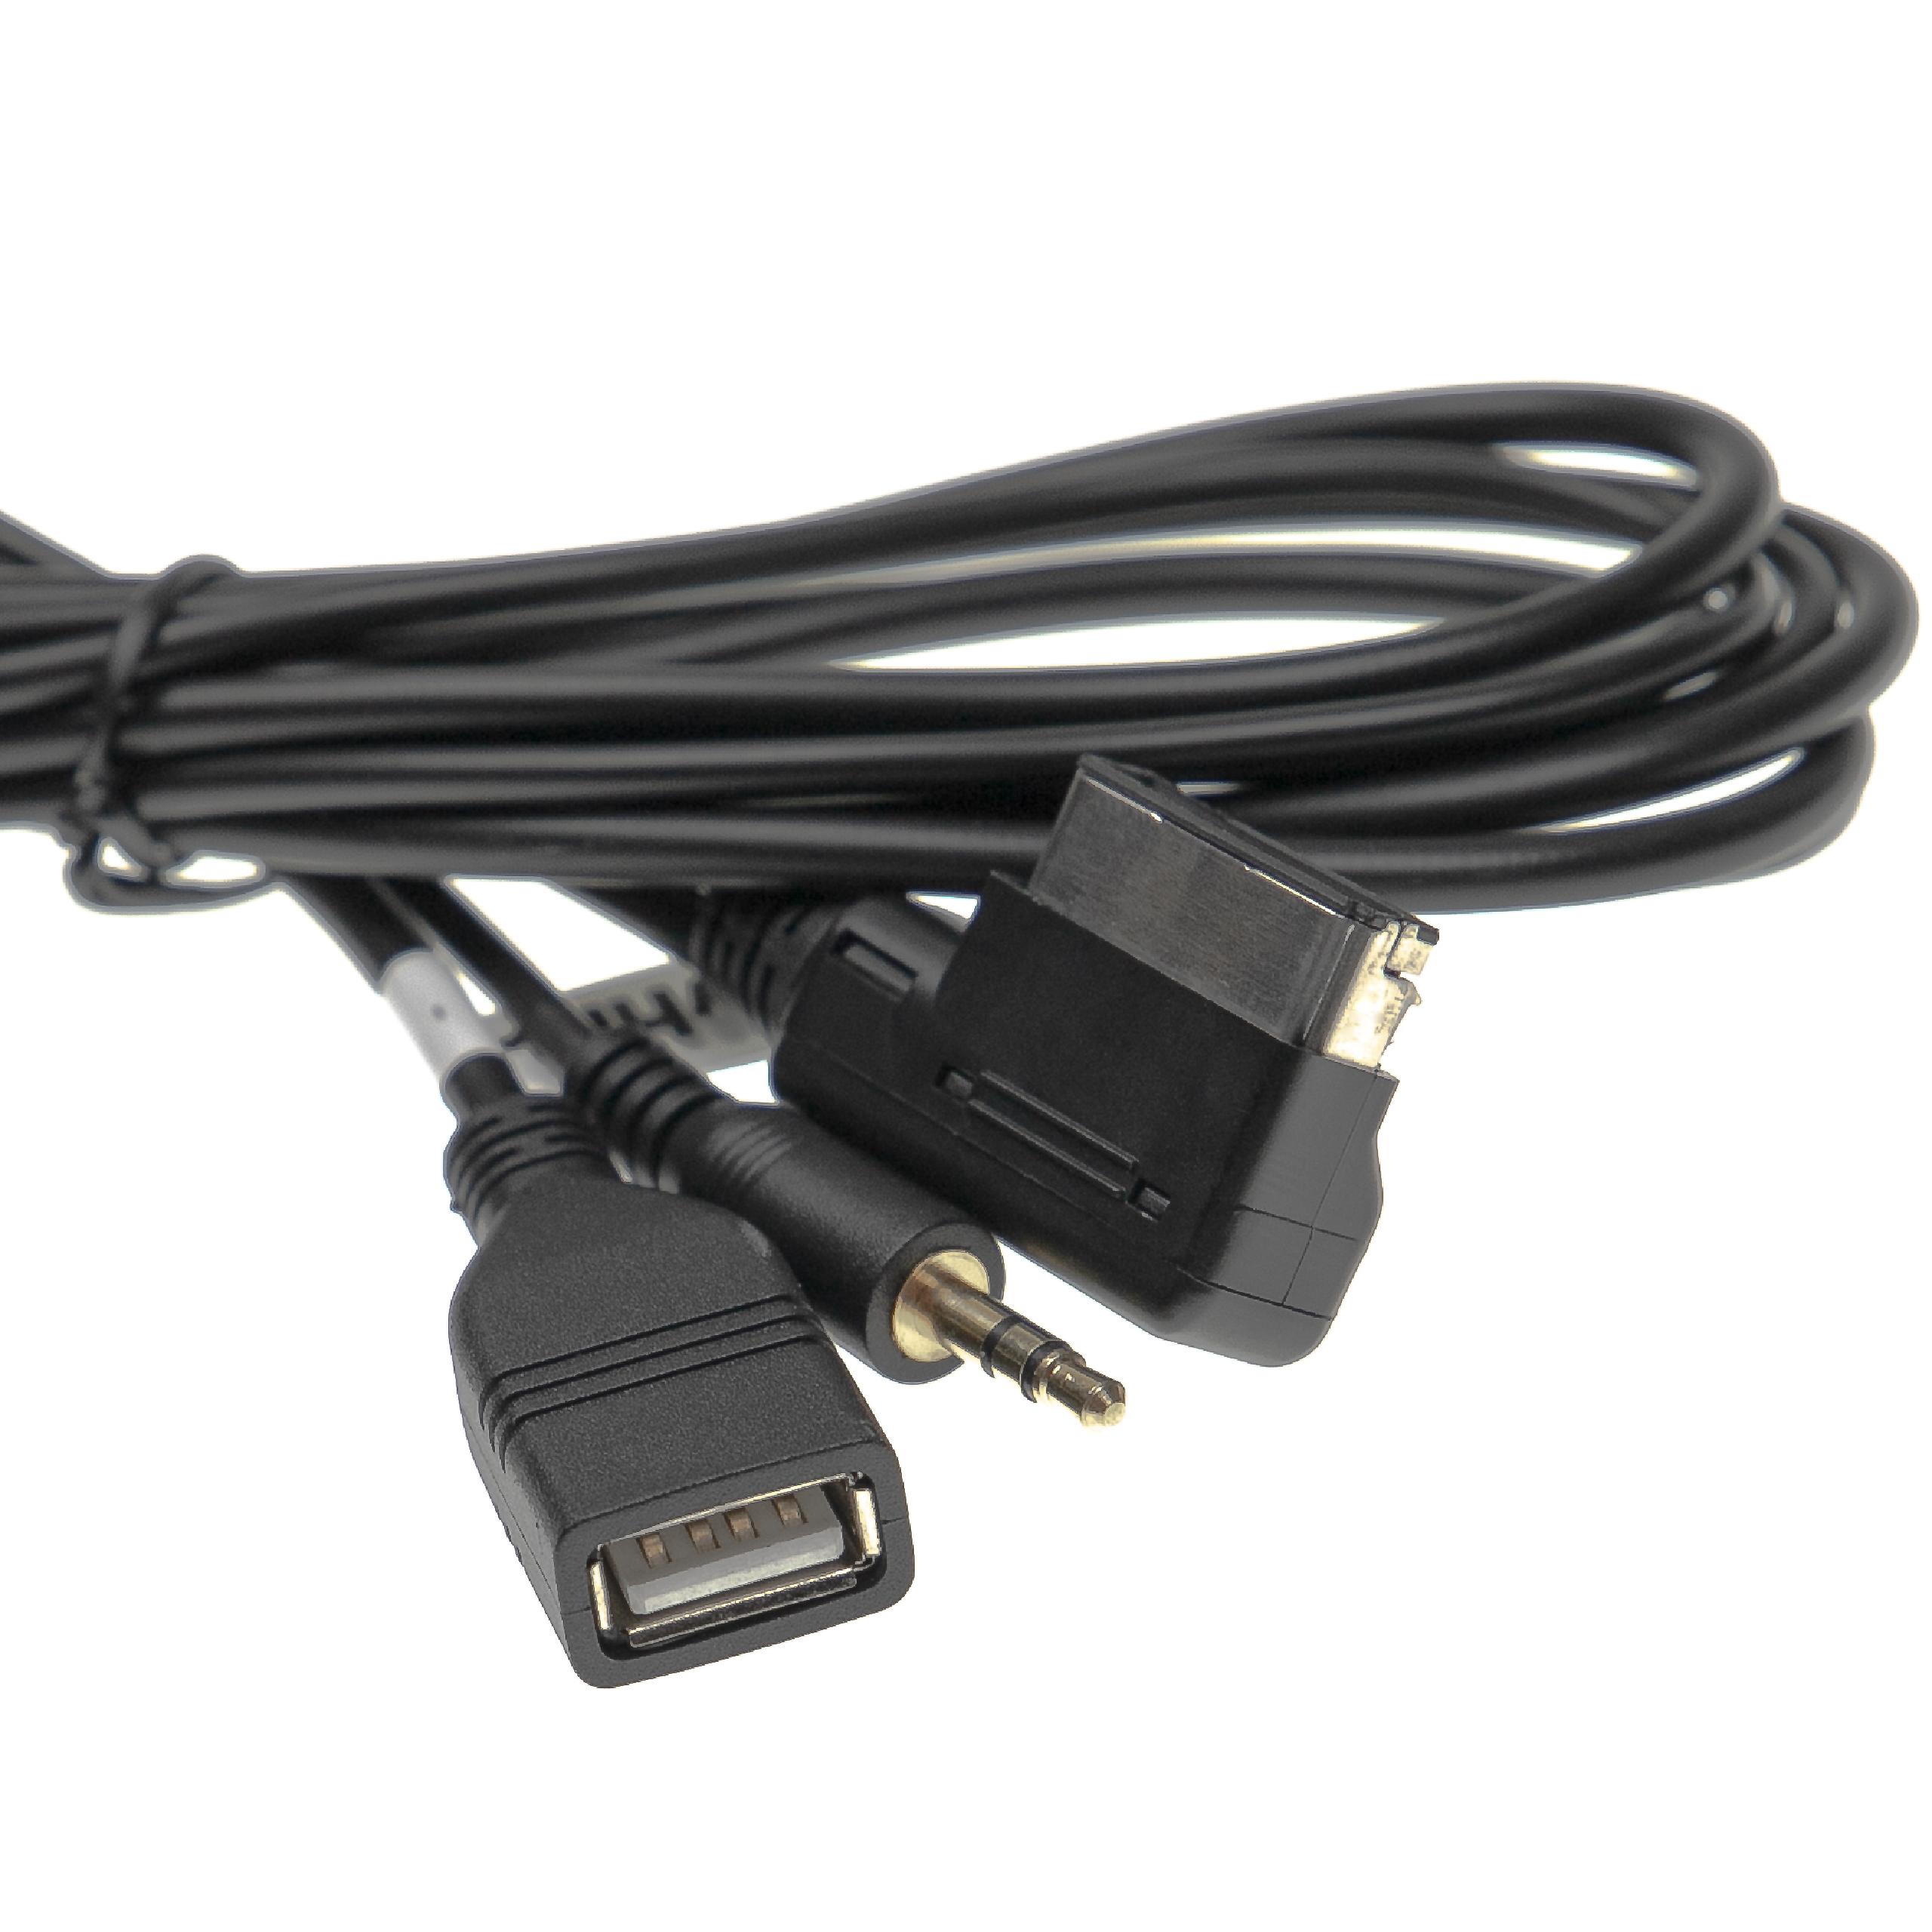 AUX Audio Adapter Cable for A1 Audi Car Radio etc.